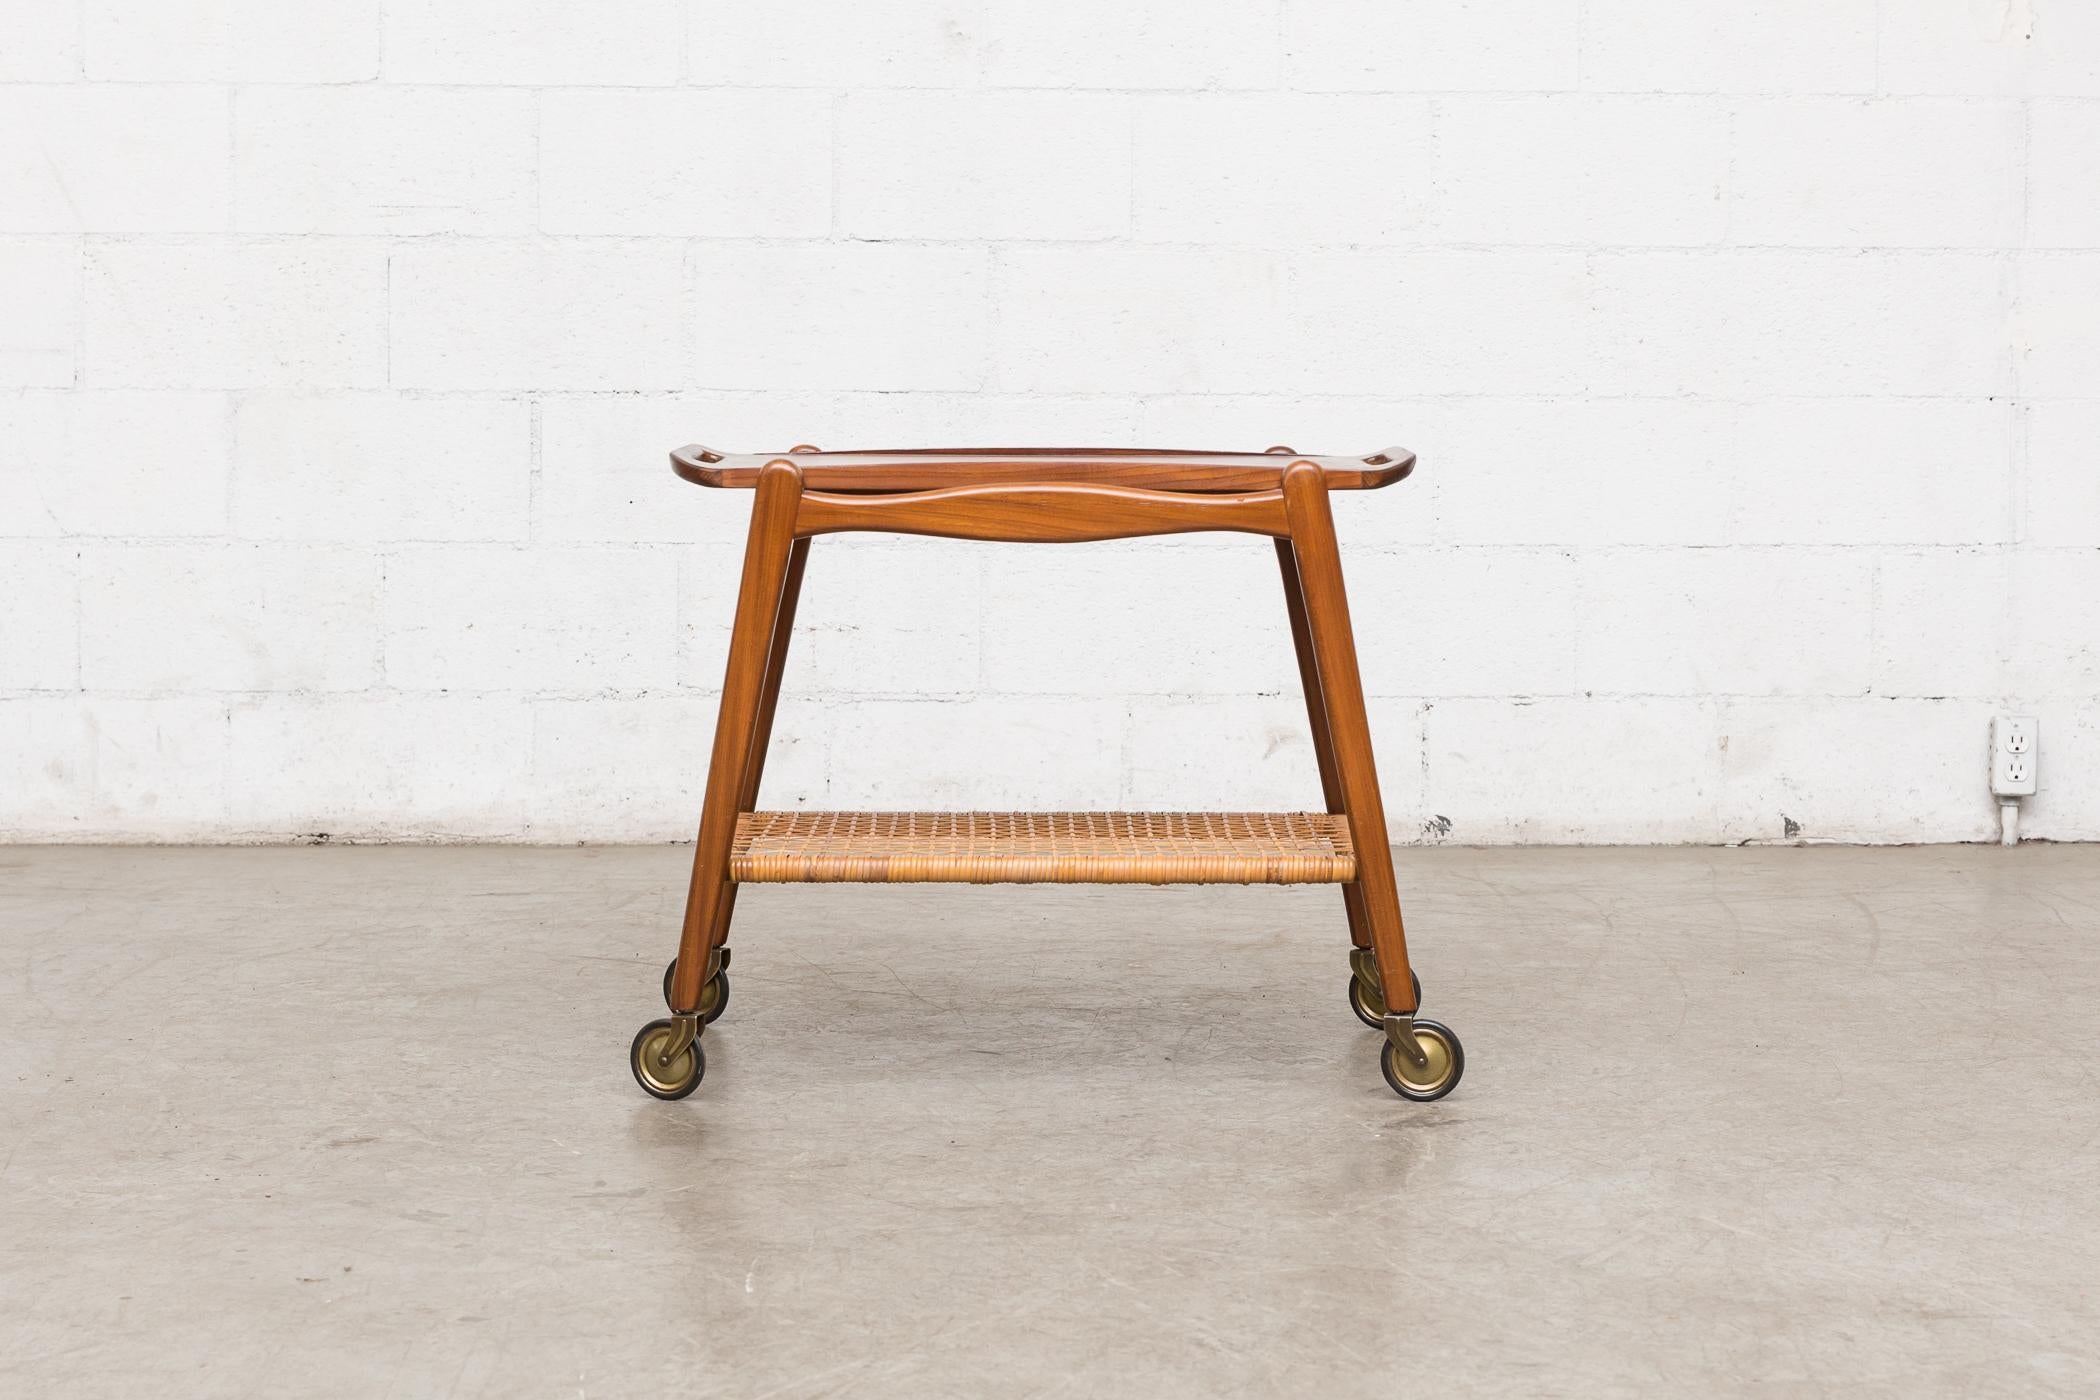 Mid-Century rolling cart by Johannes Andersen, Denmark. Lightly refinished teak. Removable tray with woven rattan lower shelf. In good original condition with some wear. Wear is consistent with its age and use. 2 available, with slightly varying